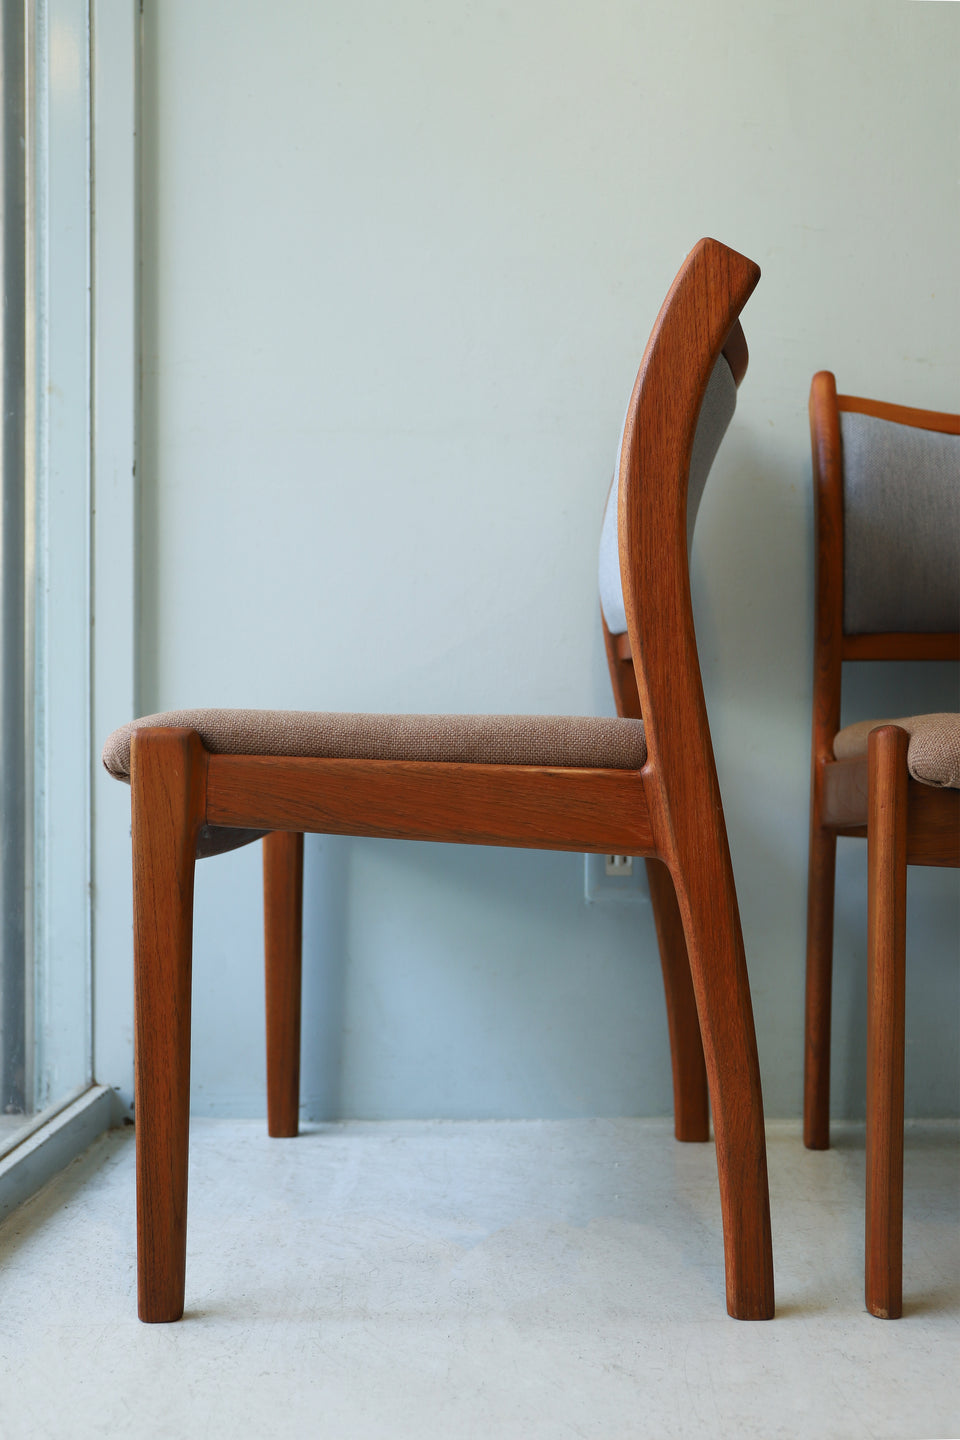 Teakwood Dining Chair Japanese Vintage/ジャパンヴィンテージ ダイニングチェア チーク材 北欧スタイル